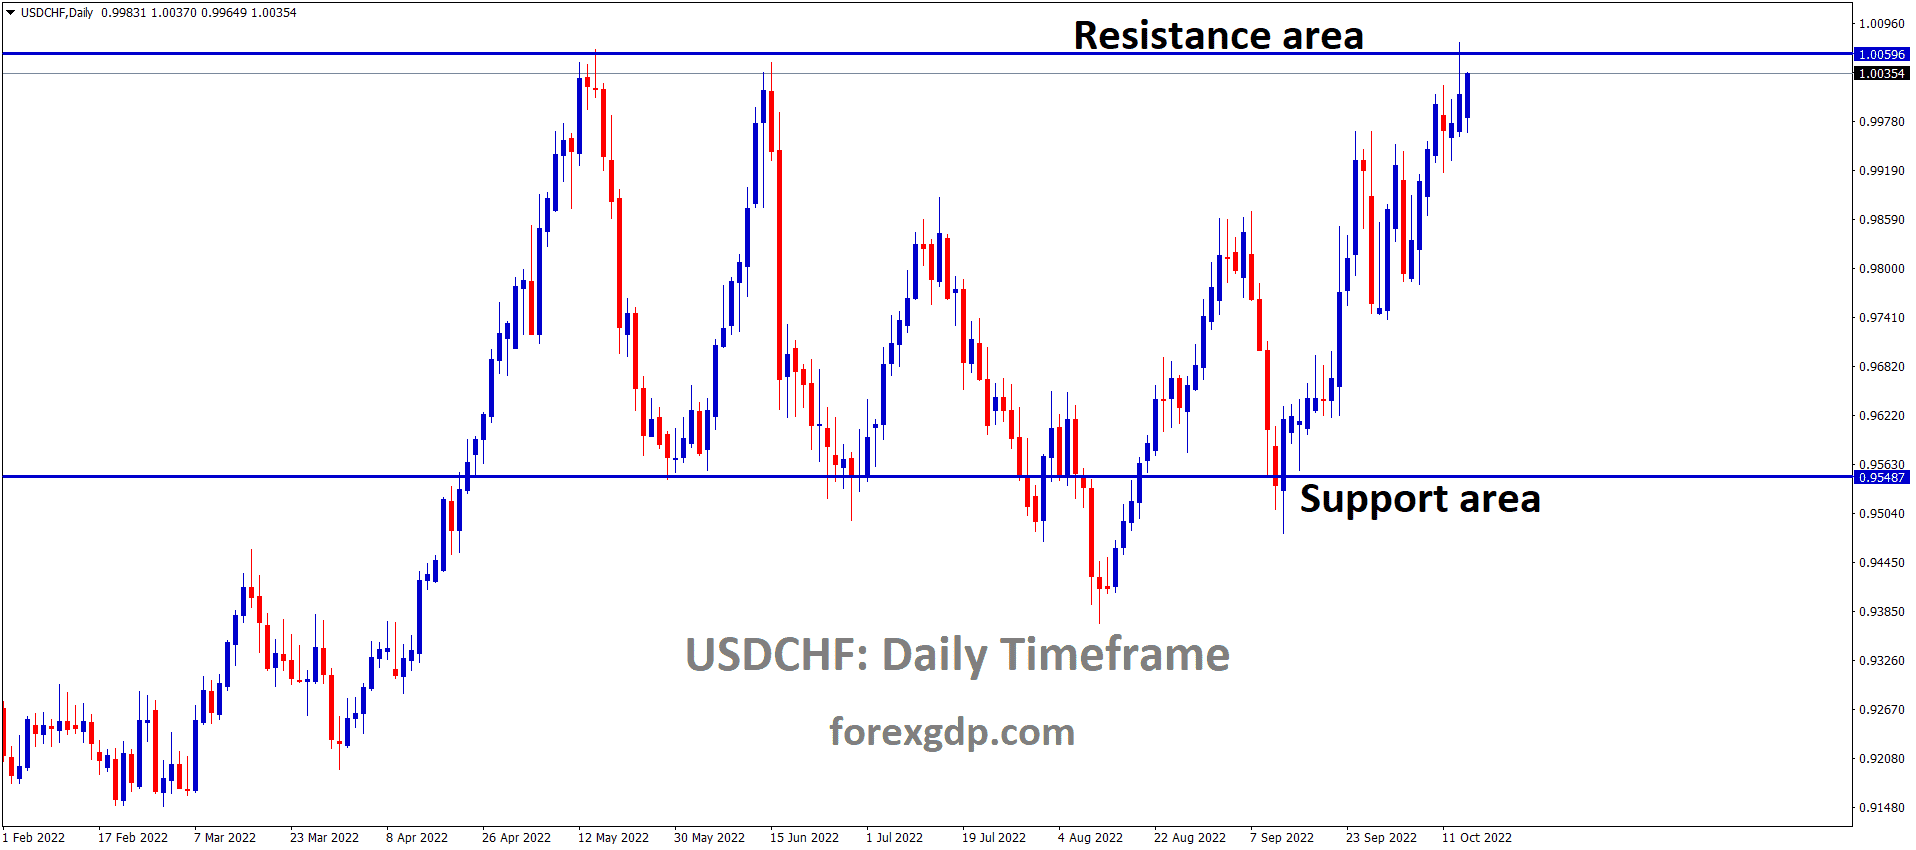 USDCHF is moving in the Box pattern and the market has reached the resistance area of the pattern 1